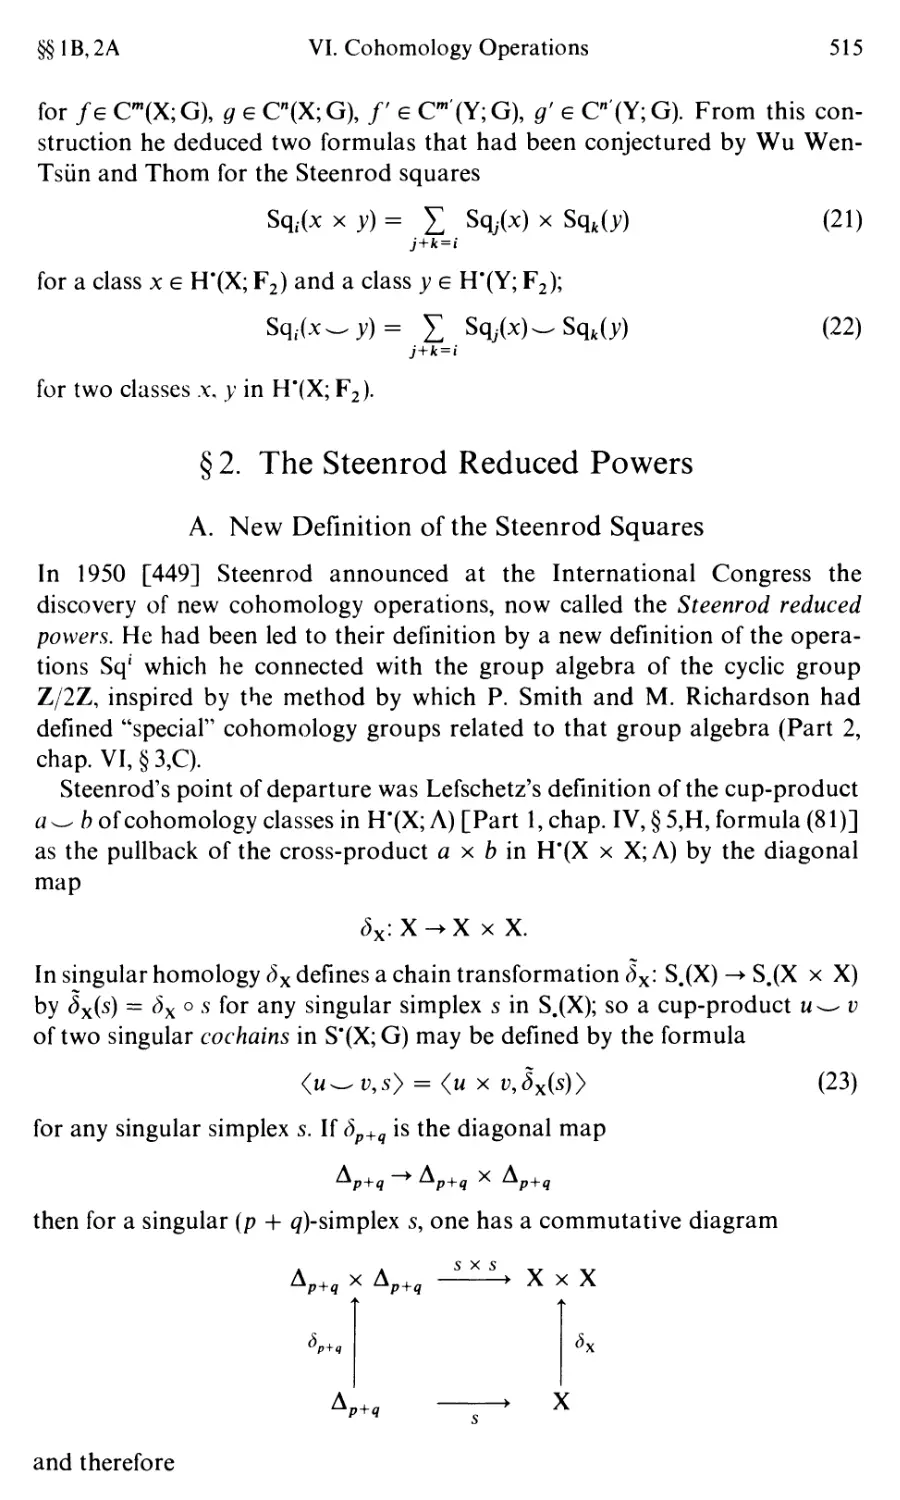 §2. The Steenrod Reduced Powers